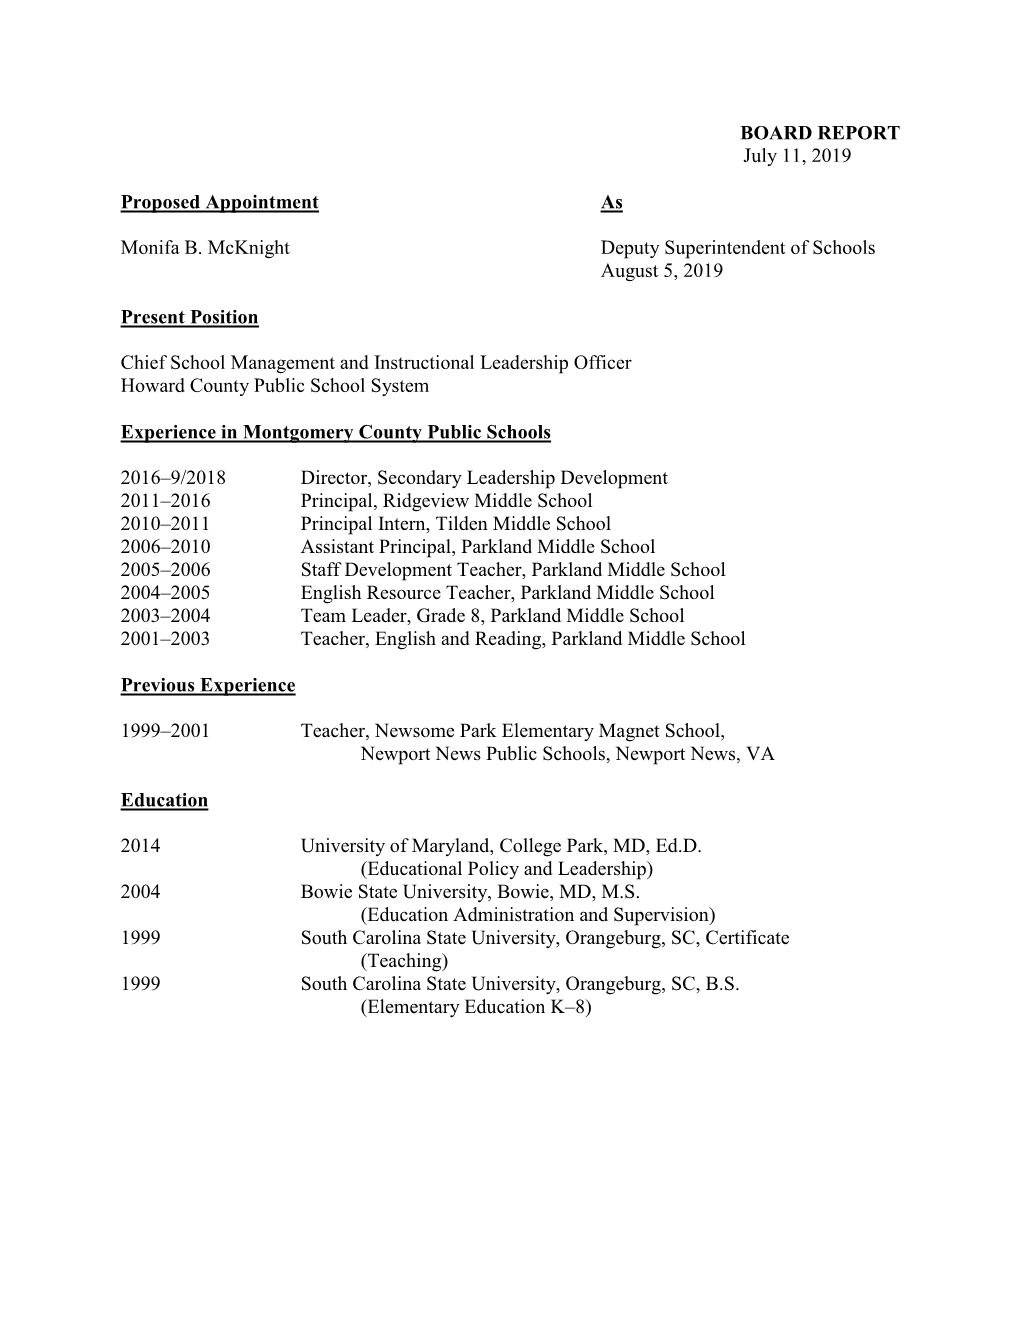 BOARD REPORT July 11, 2019 Proposed Appointment As Monifa B. Mcknight Deputy Superintendent of Schools August 5, 2019 Present